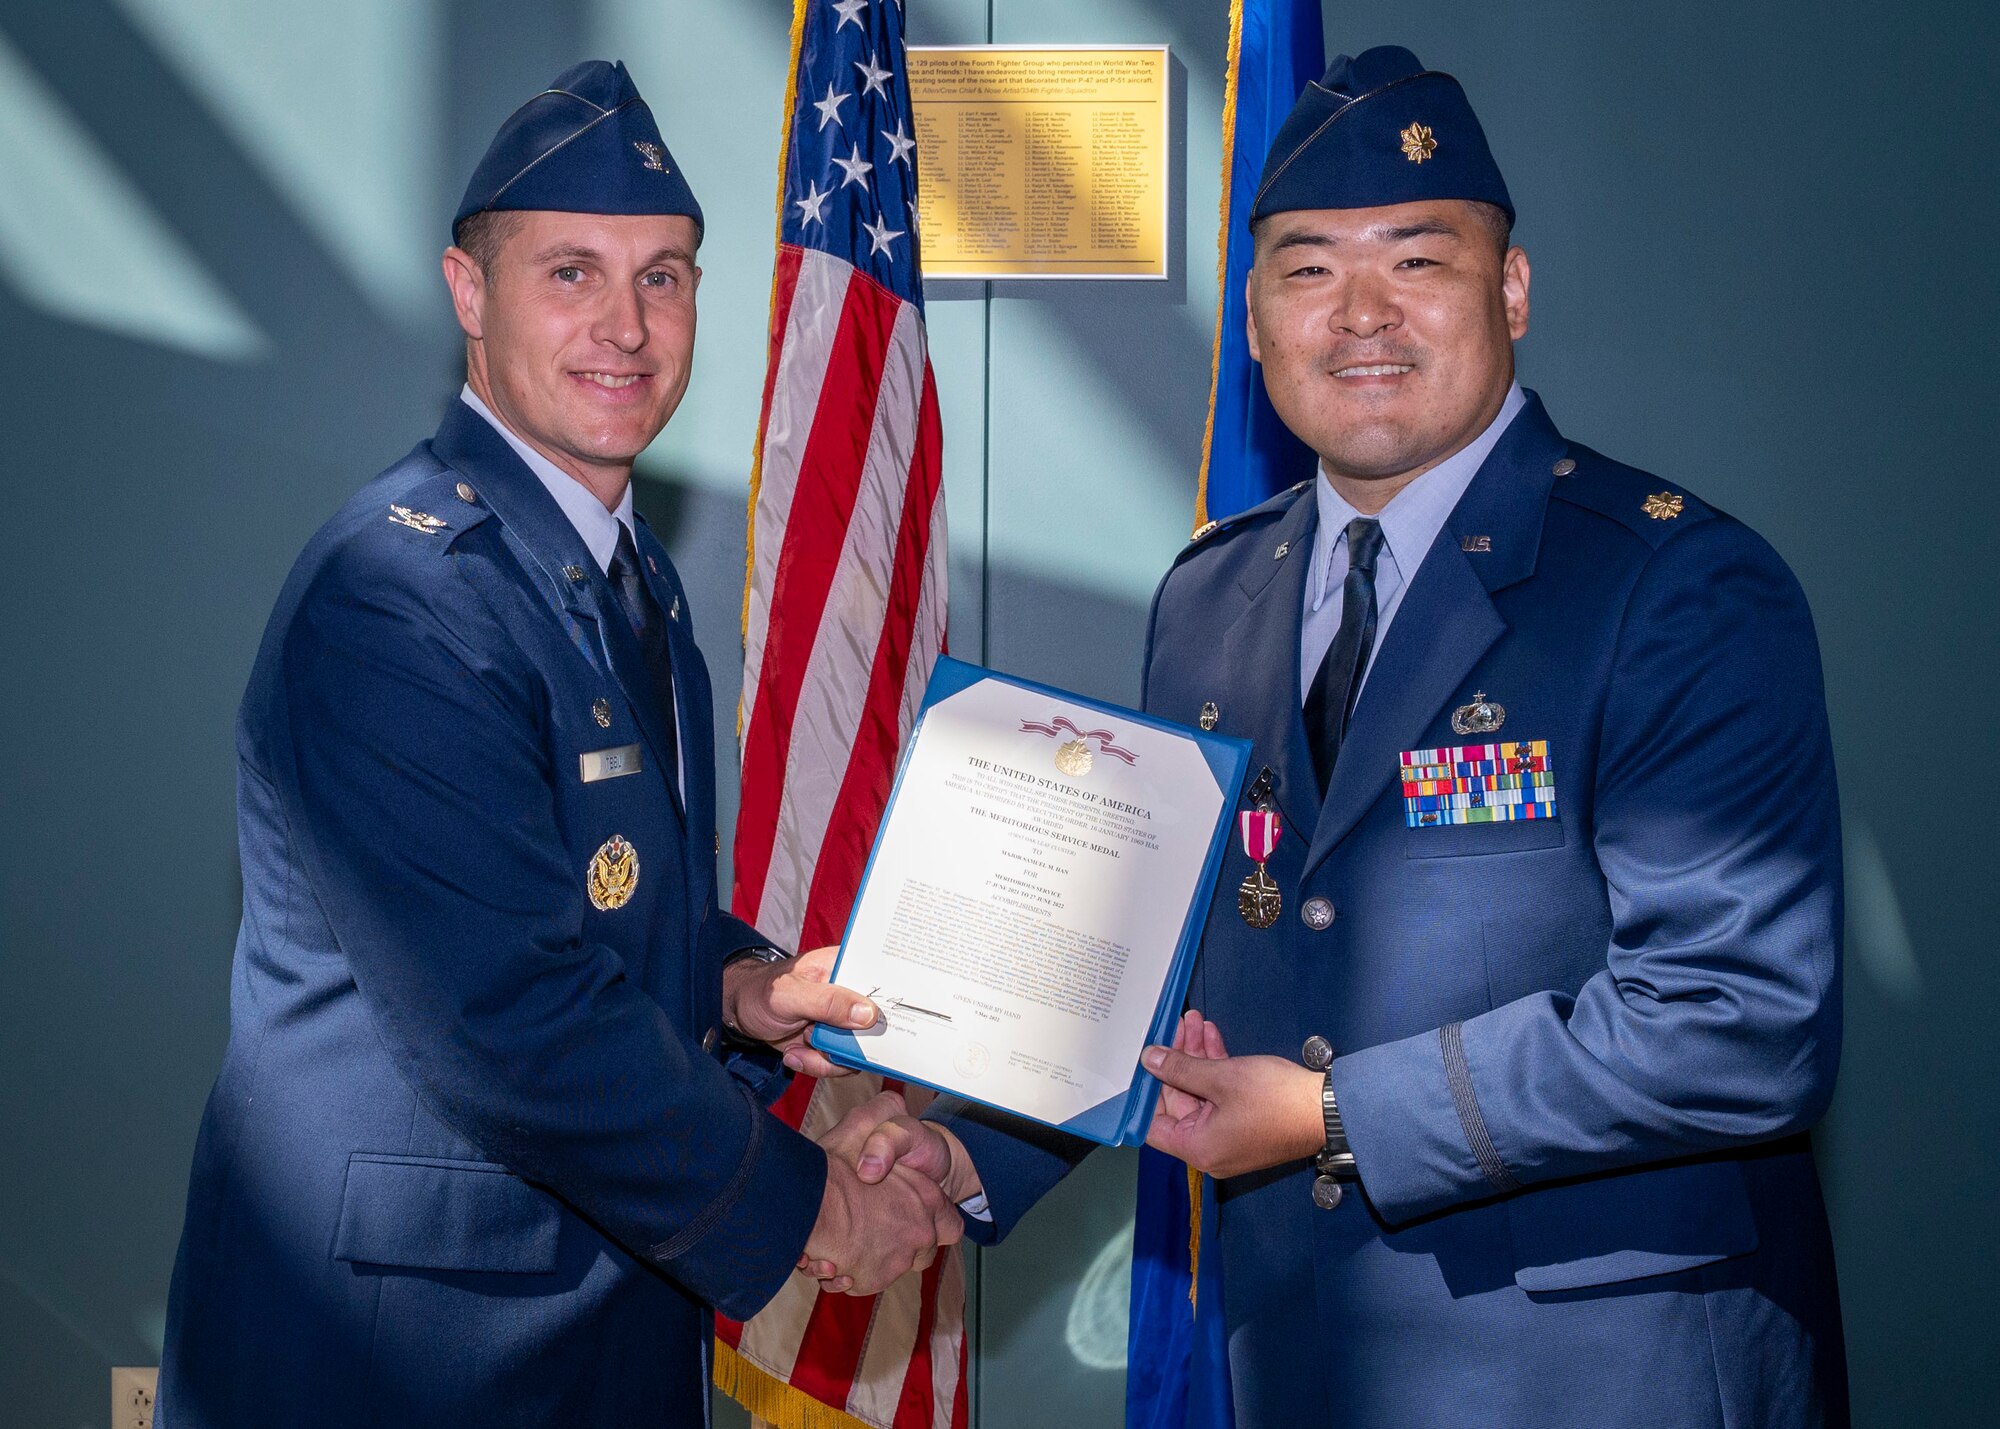 Col. Lucas Teel, left, 4th Fighter Wing commander, presents Maj. Samuel Han, outgoing 4th Comptroller Squadron commander, with the Meritorious Service Medal at Seymour Johnson Air Force Base, North Carolina, June 24, 2022.